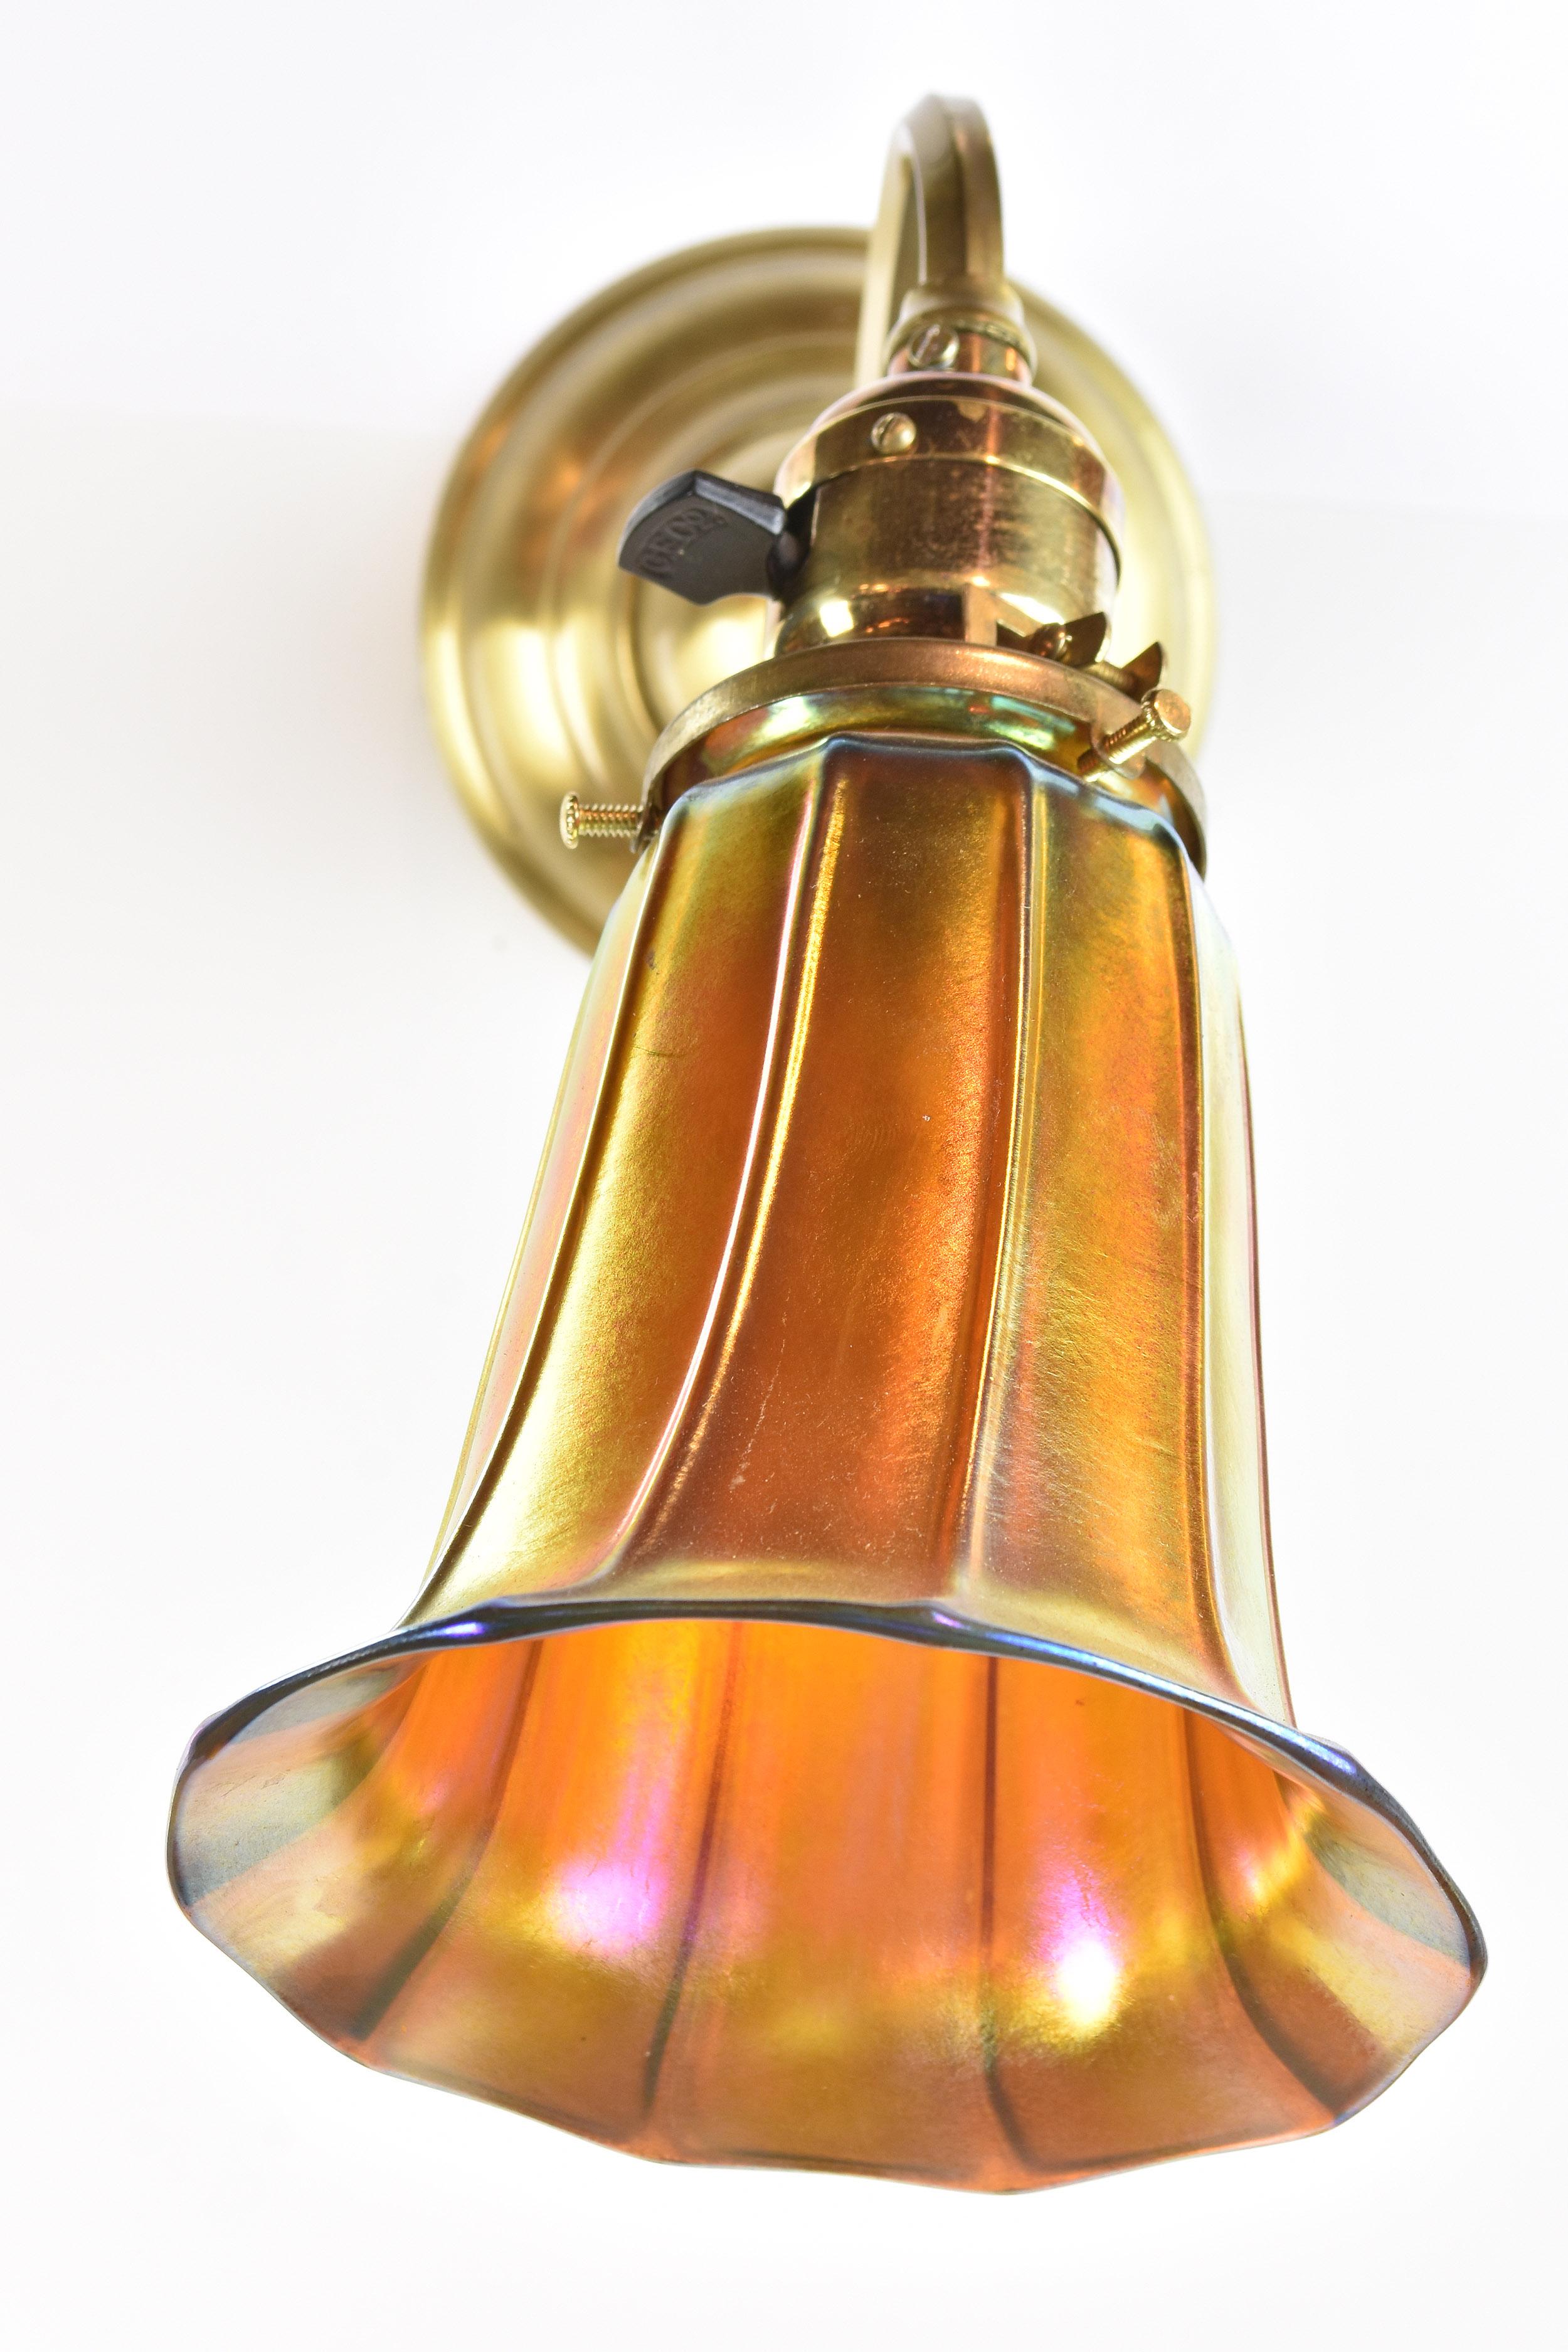 Three available.

This striking sconce was manufactured by Bradley & Hubbard, a premier lighting company of the late 19th and early 20th century. The golden hardware compliments the orange hue of the shade, which reflects light